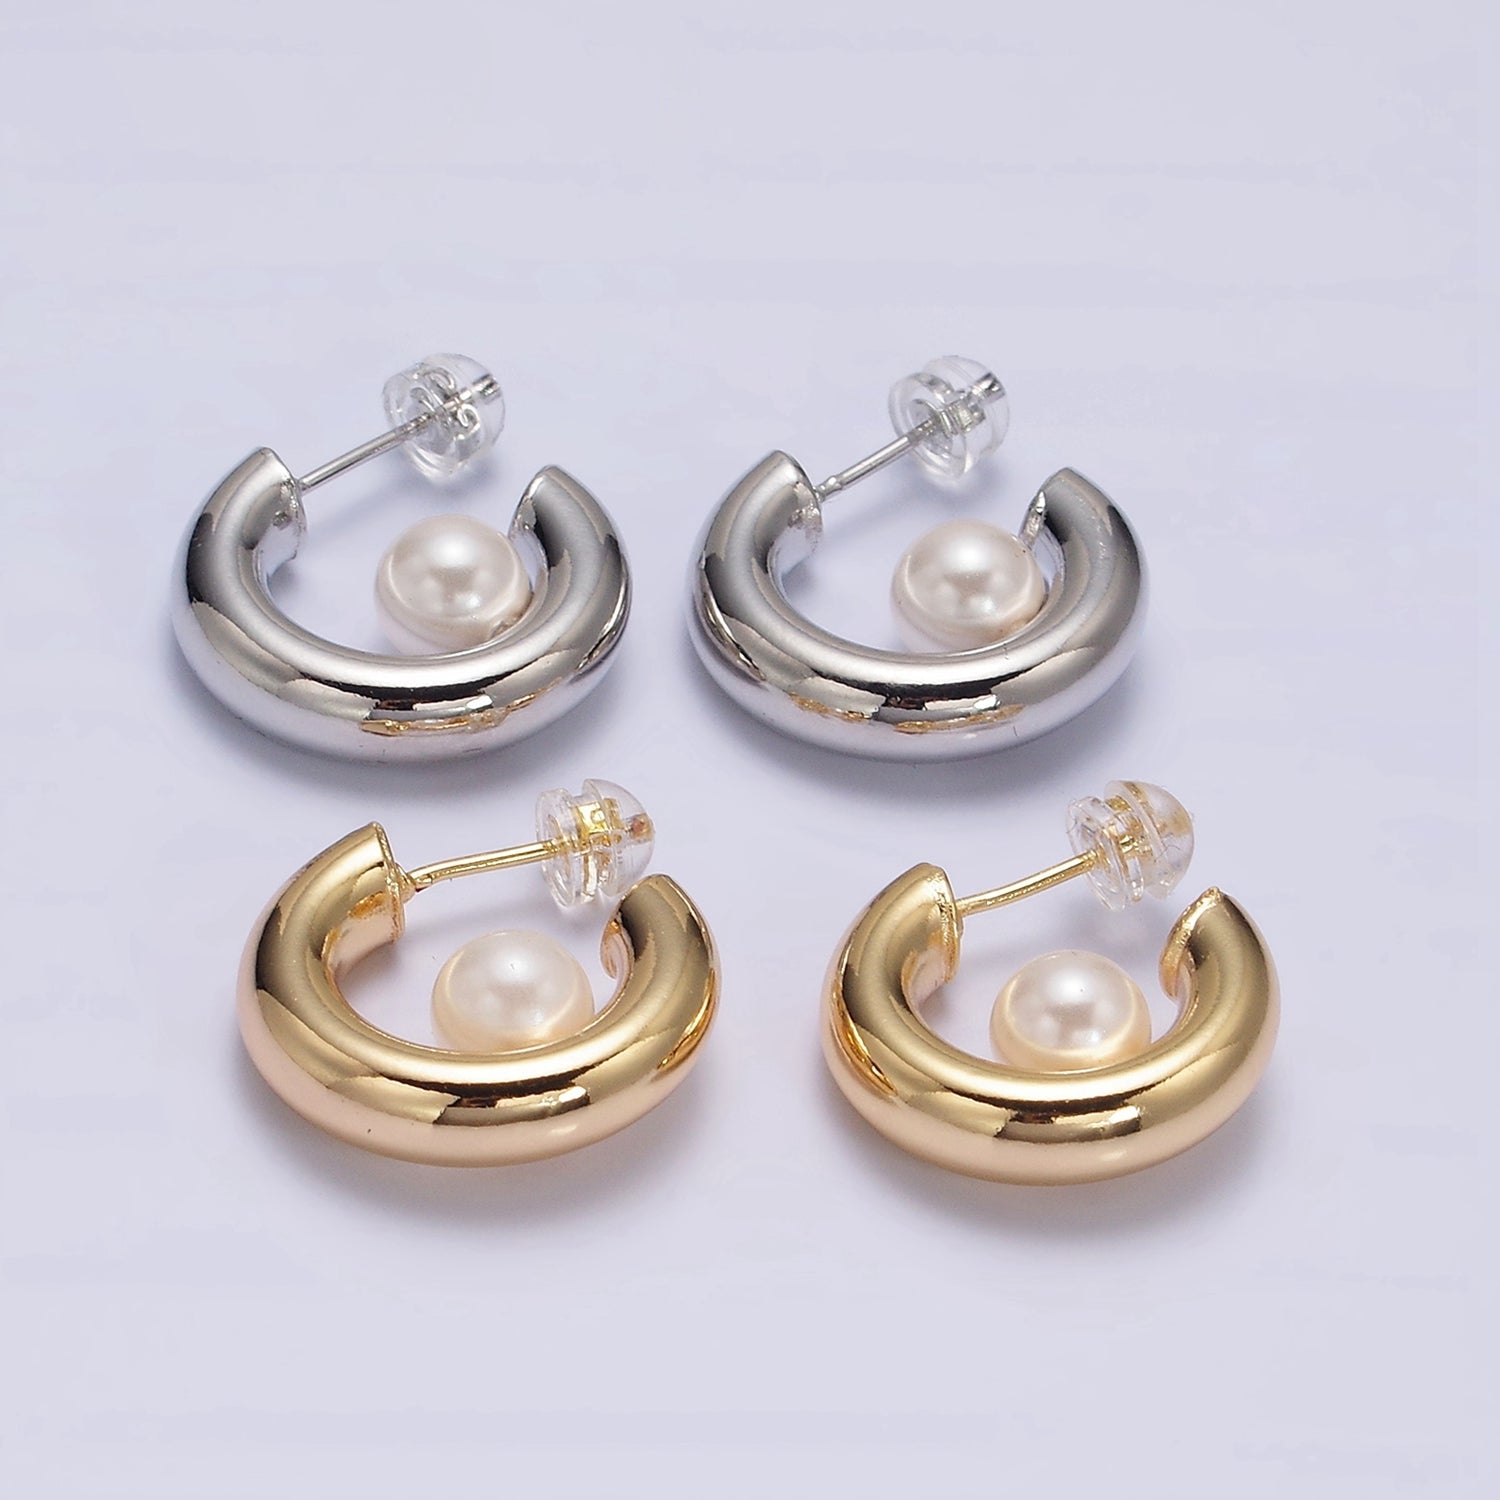 16K Gold Filled 20mm Chubby Round White Pearl C-Shaped Hoop Earrings in Gold & Silver | AE572 AE573 - DLUXCA